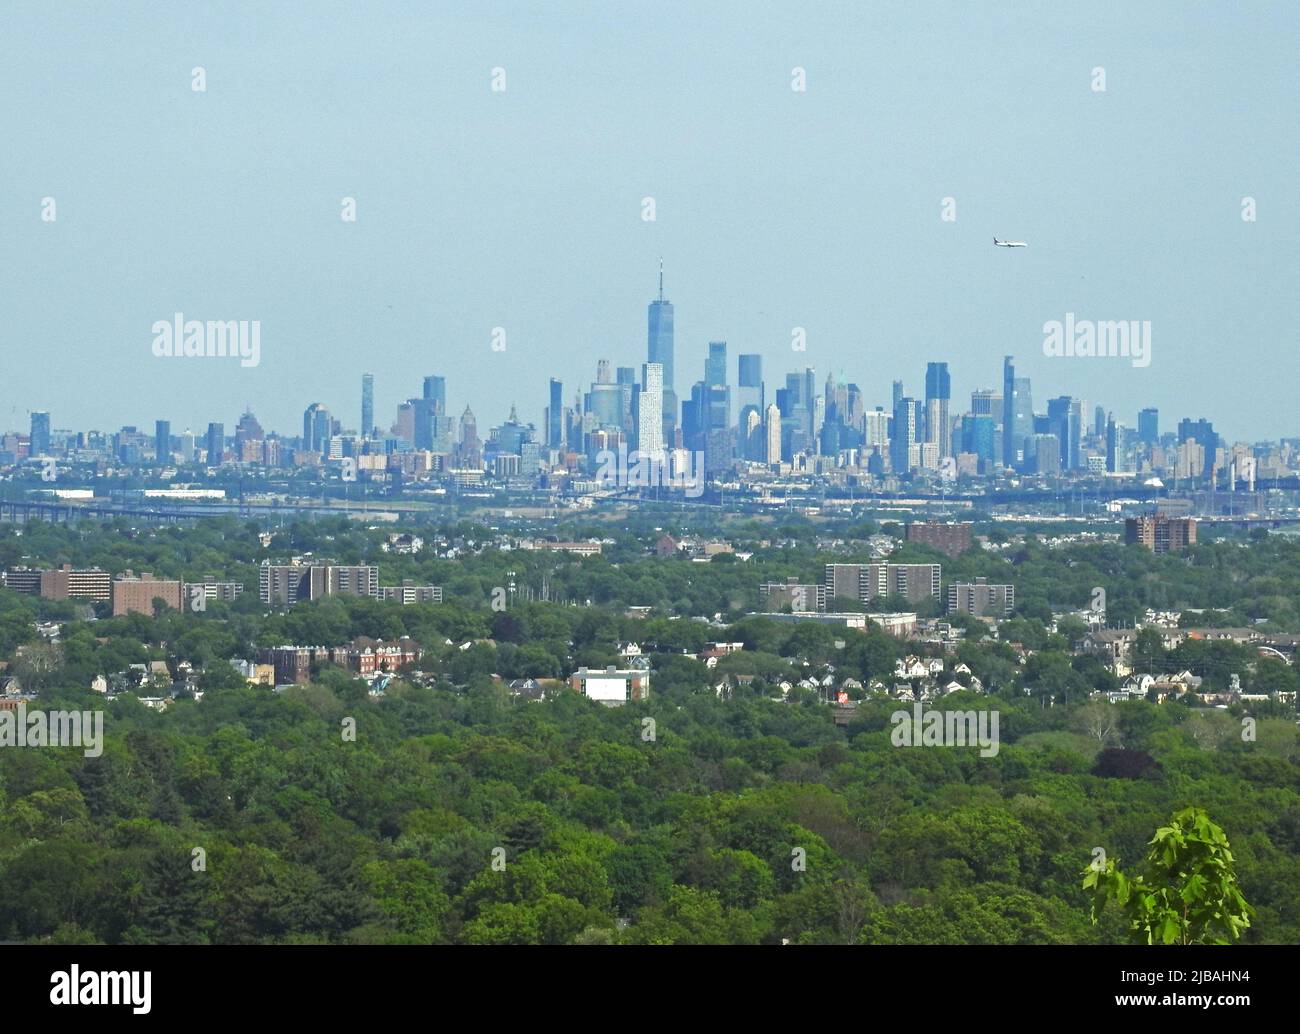 View of New York City's Manhattan skyline from Eagle Rock Reservation in Montclair, NJ, with some atmospheric distortion caused by the distance -01 Stock Photo